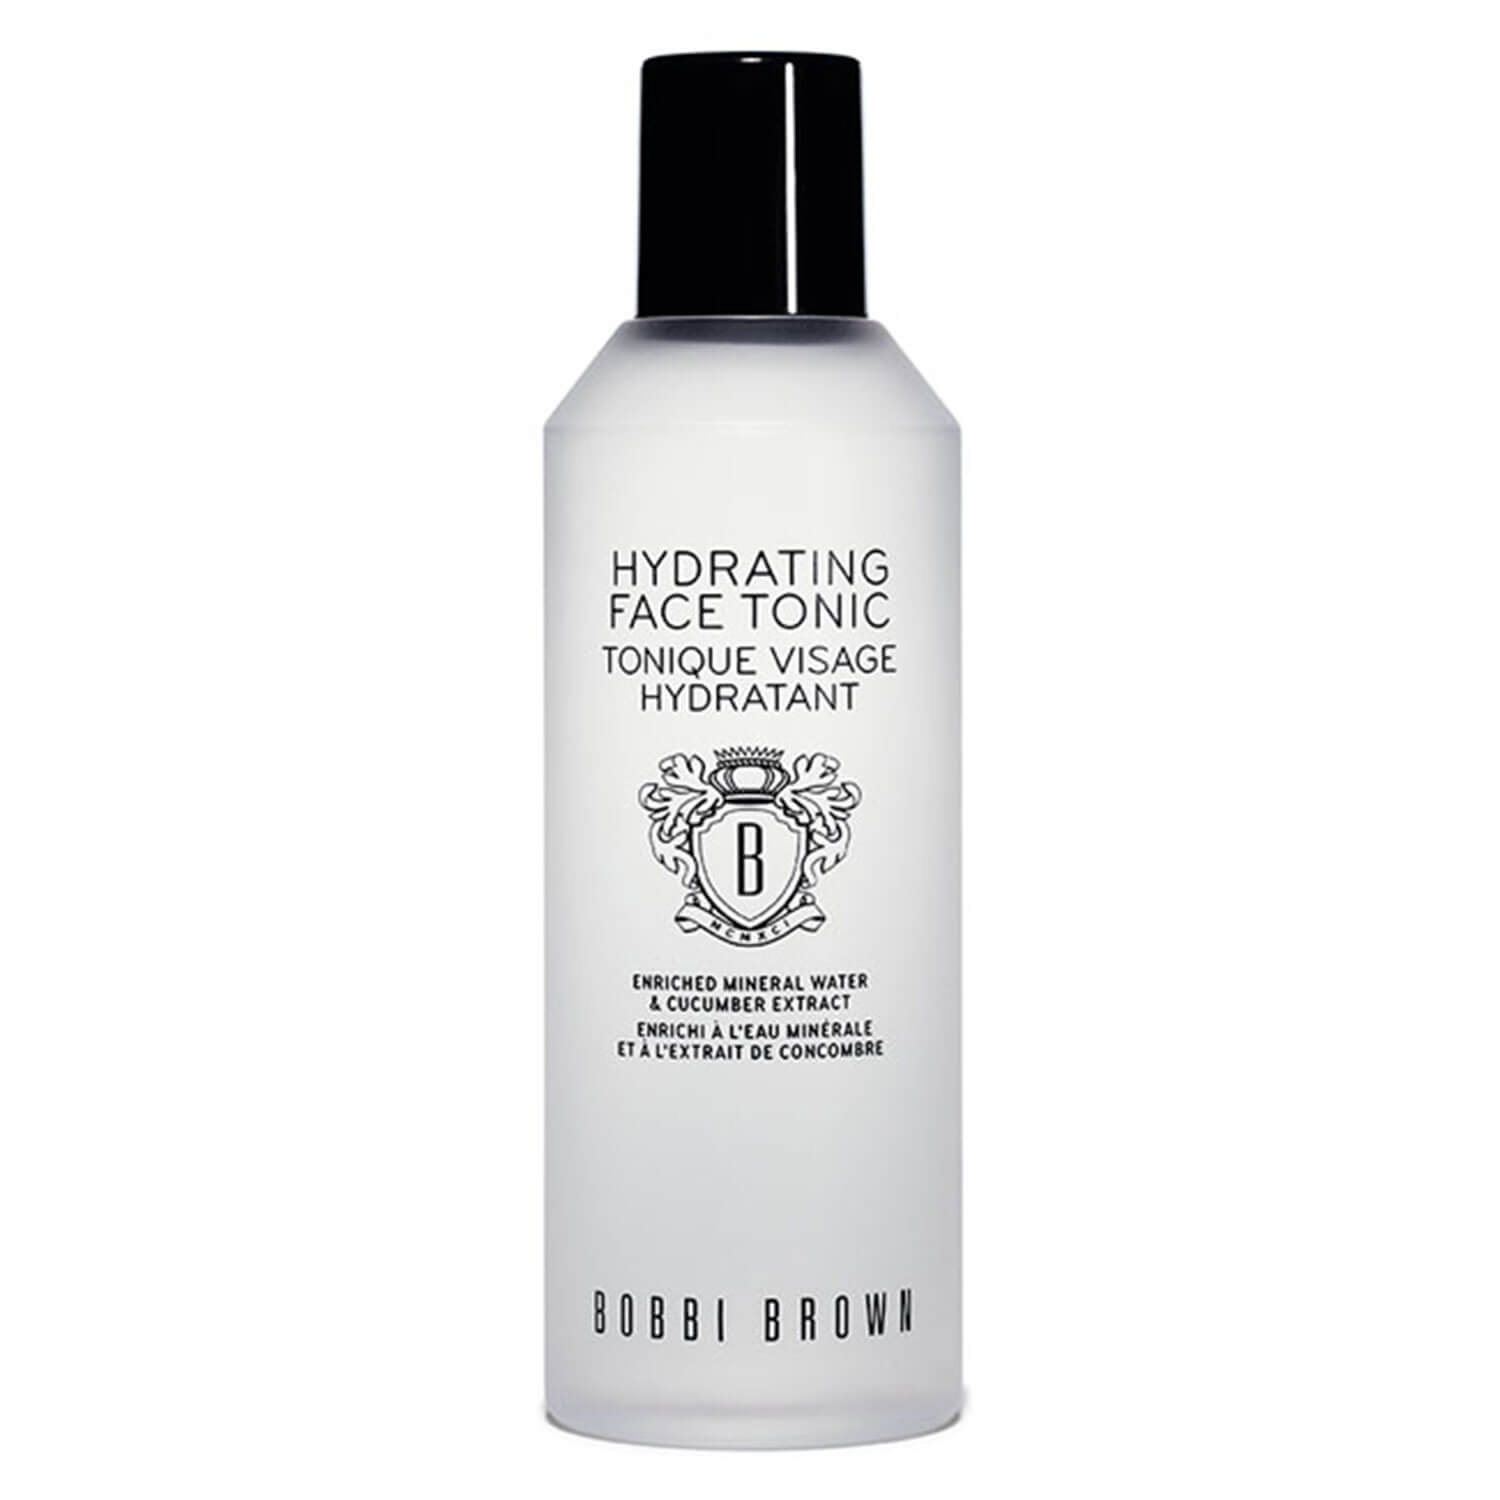 Product image from BB Skincare - Hydrating Face Tonic